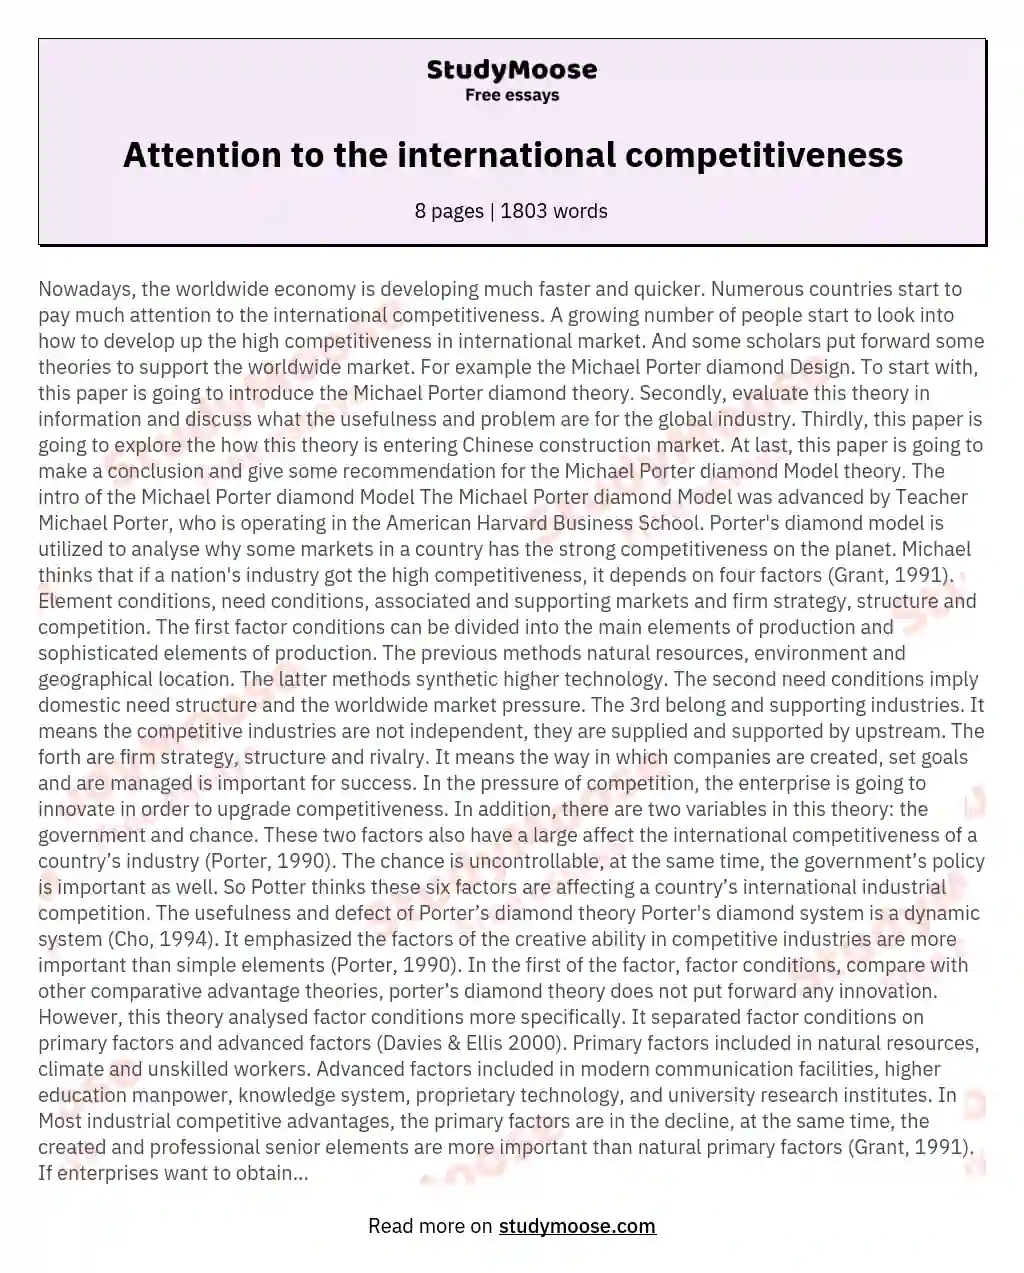 Attention to the international competitiveness essay